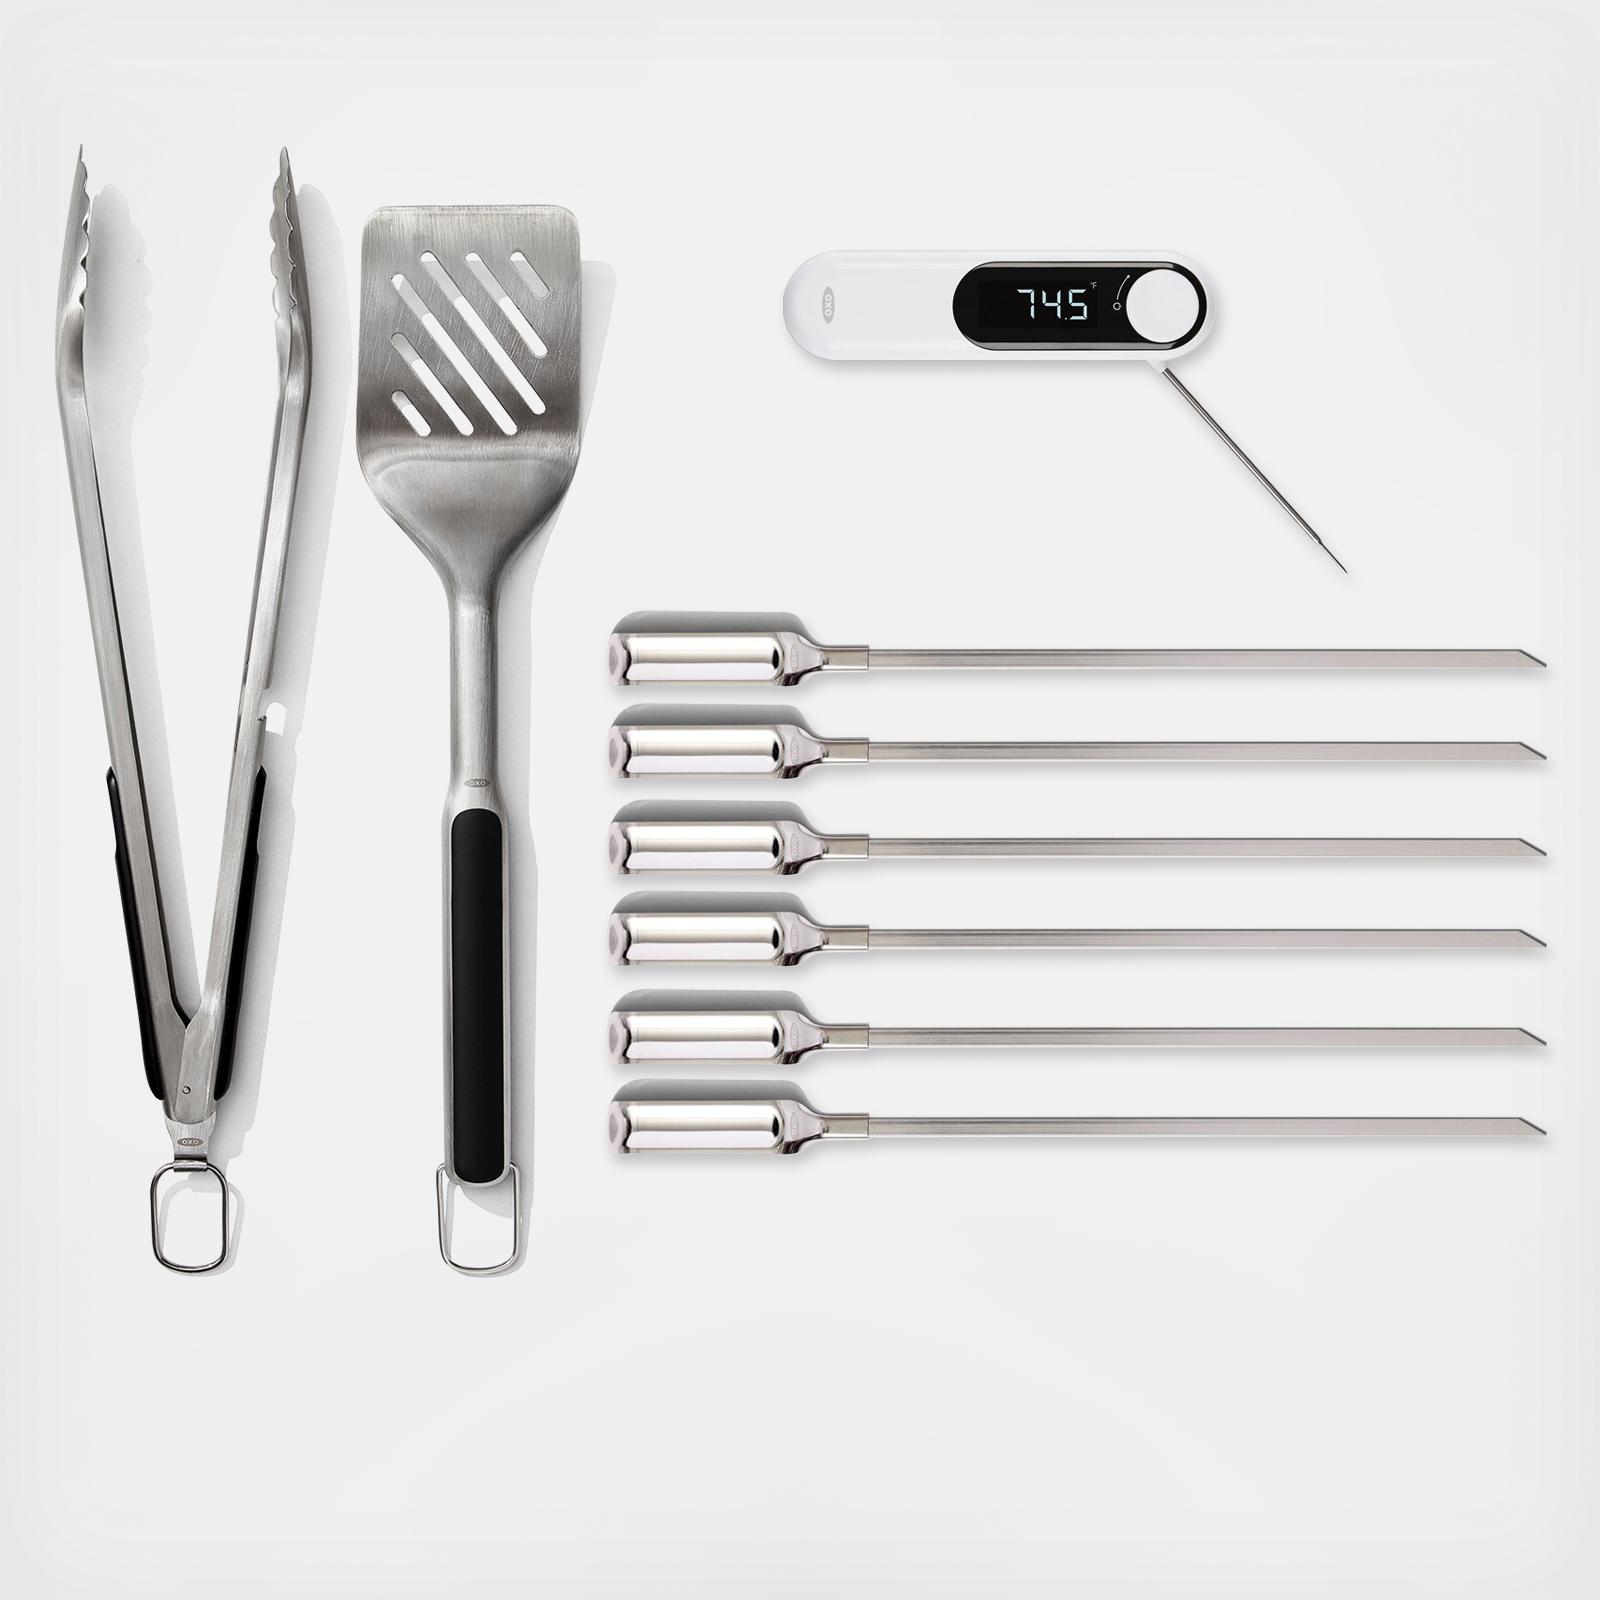 OXO Good Grips Stainless Steel Grilling Turner and Tong Set (2